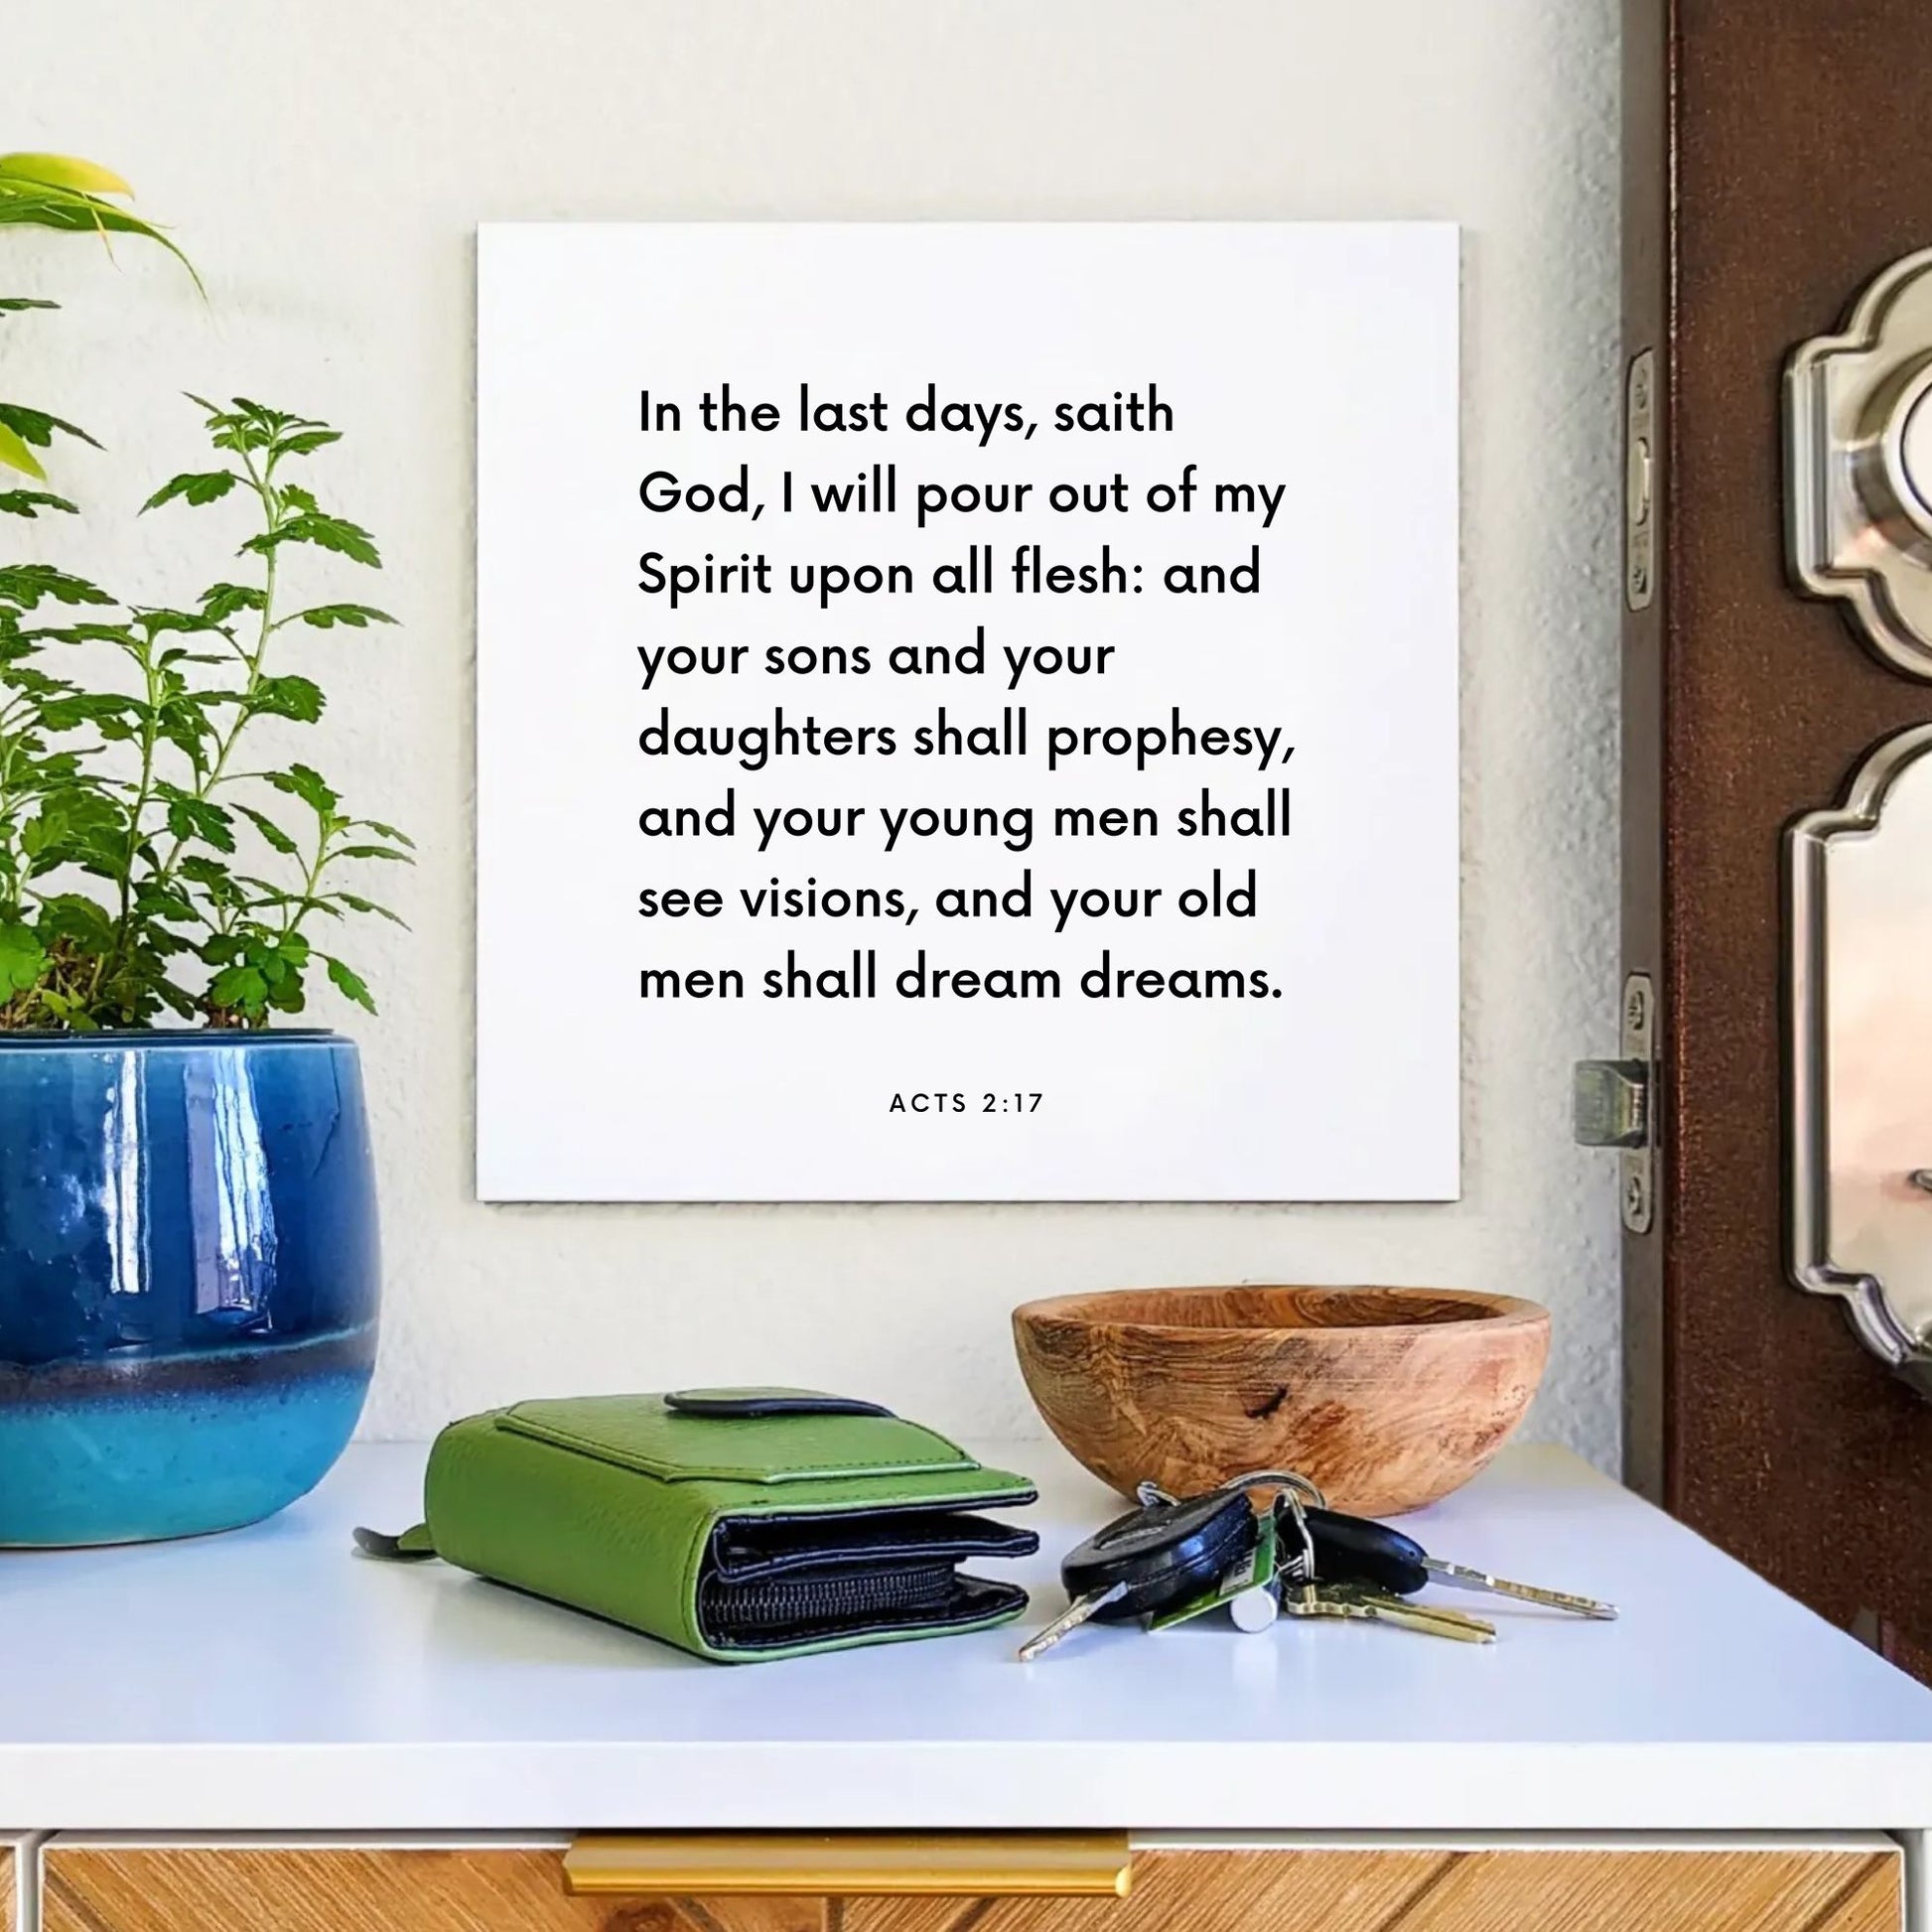 Entryway mouting of the scripture tile for Acts 2:17 - "In the last days, I will pour out my spirit upon all flesh"